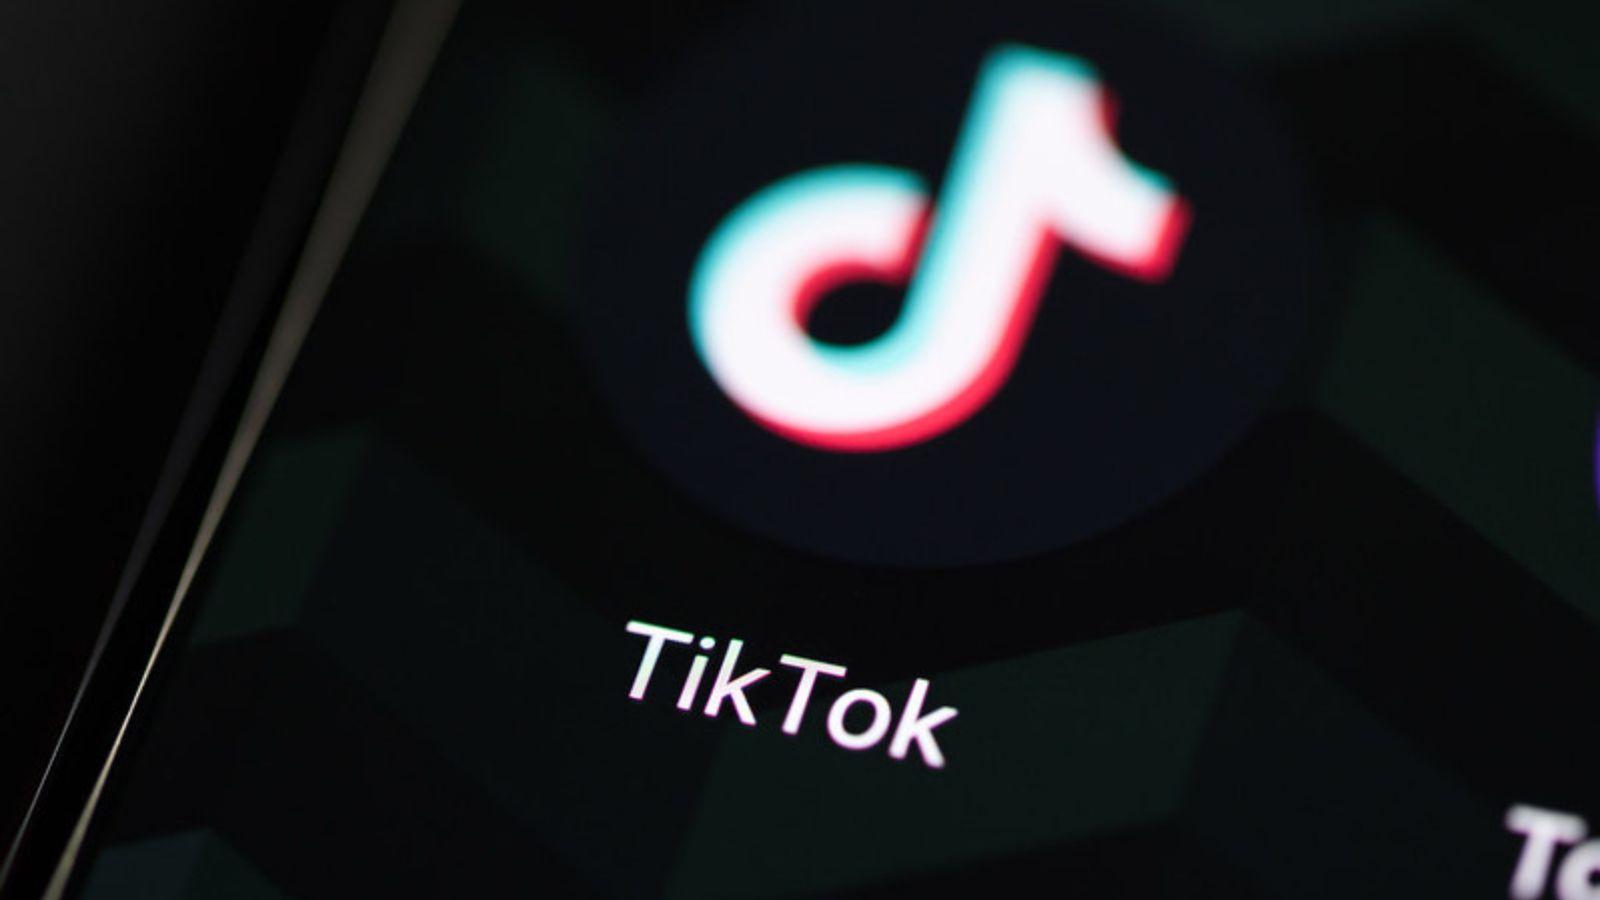 Howbto join your private server in project mugestu｜TikTok Search